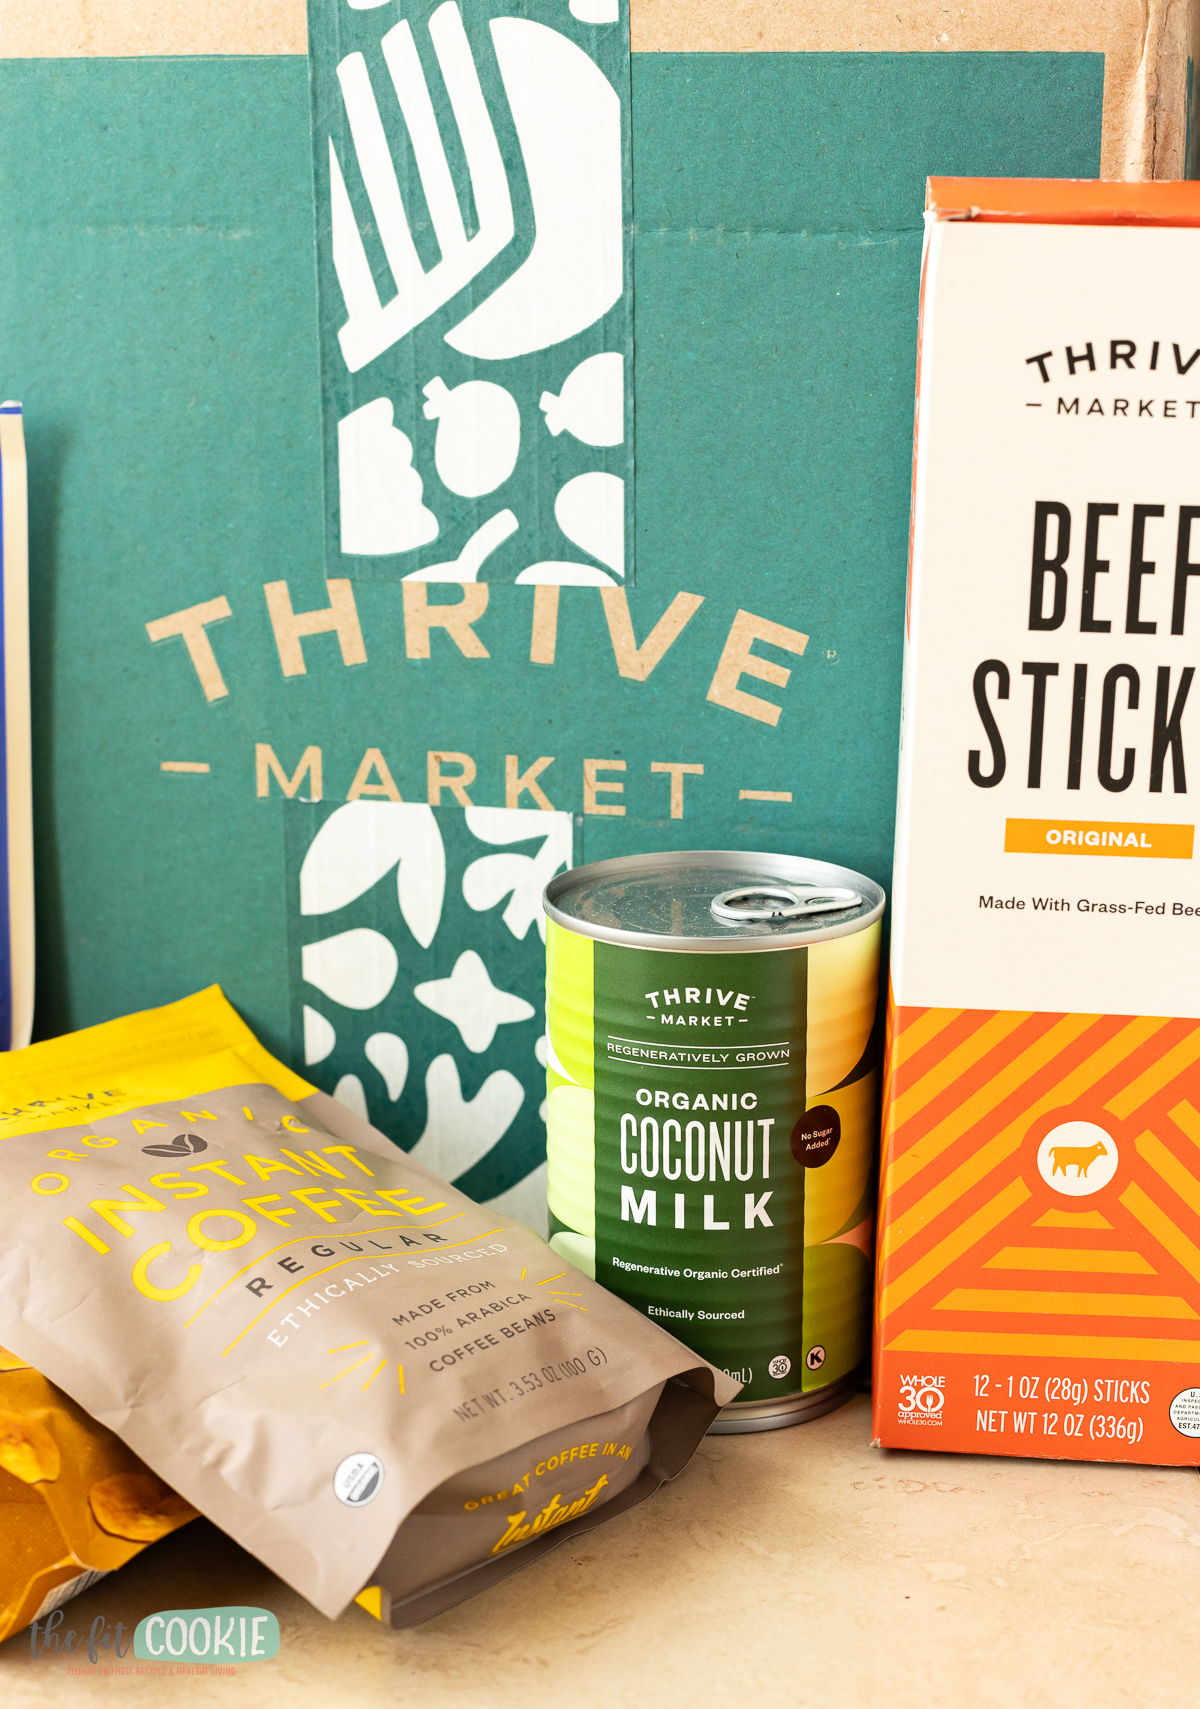 photo of thrive market branded food products in front of a thrive market box. 